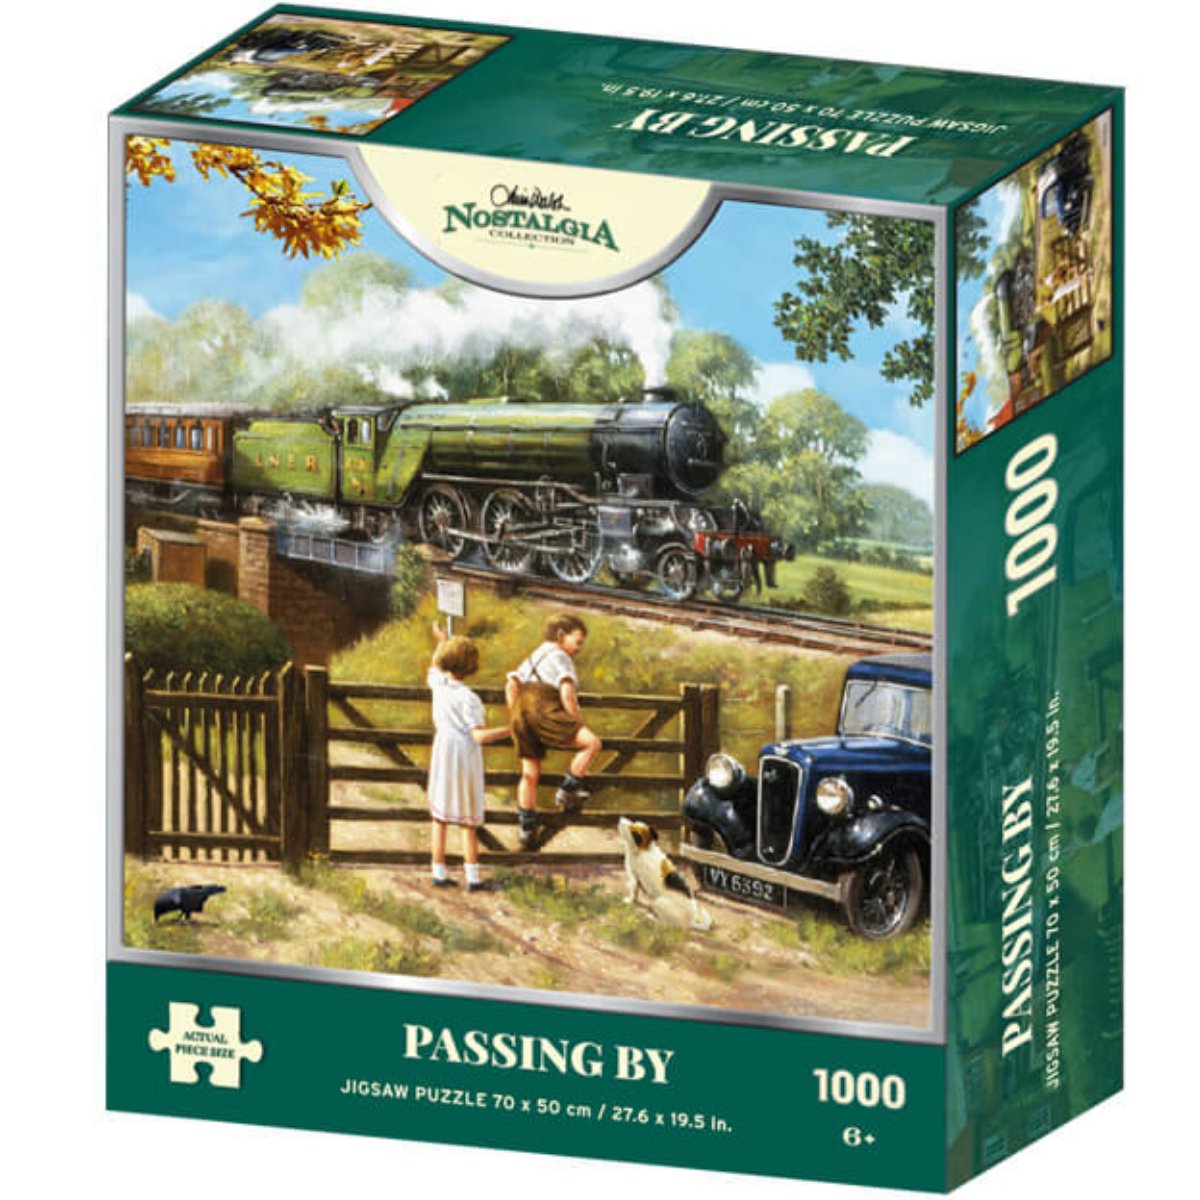 Kevin Walsh Nostalgia Passing By Jigsaw Puzzle (1000 Pieces)